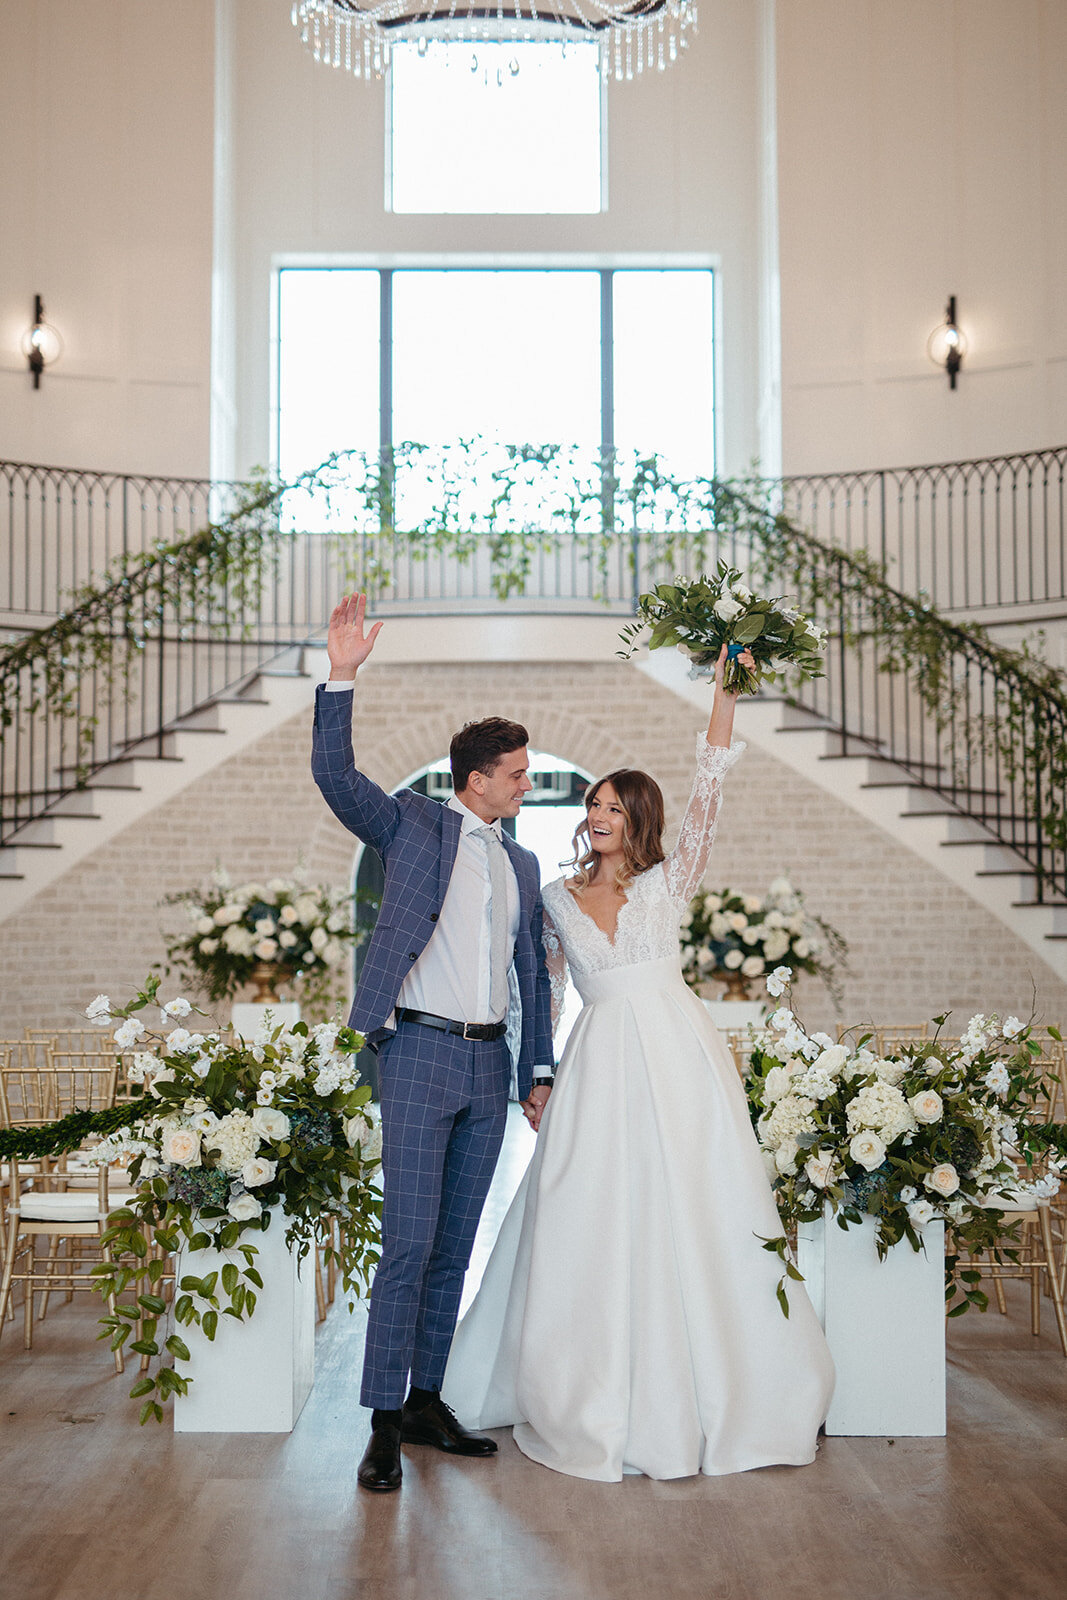 Bride and groom in a blue suit and white wedding gown wave in front a staircase wrapped in garland and white flowers